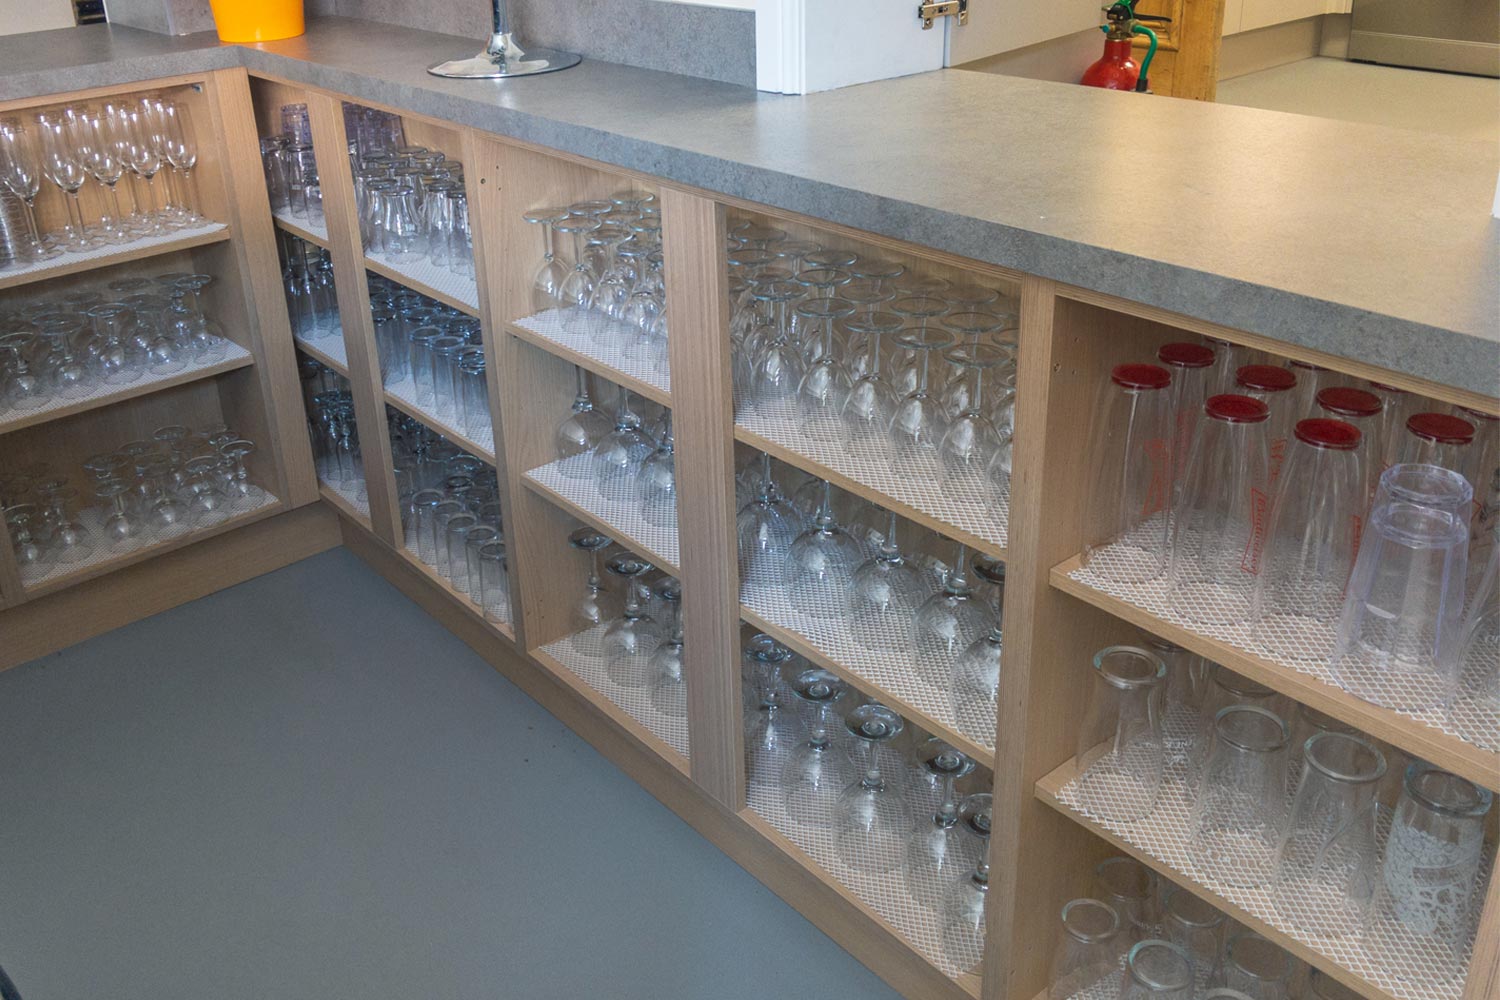 Bar area with glasses on shelves